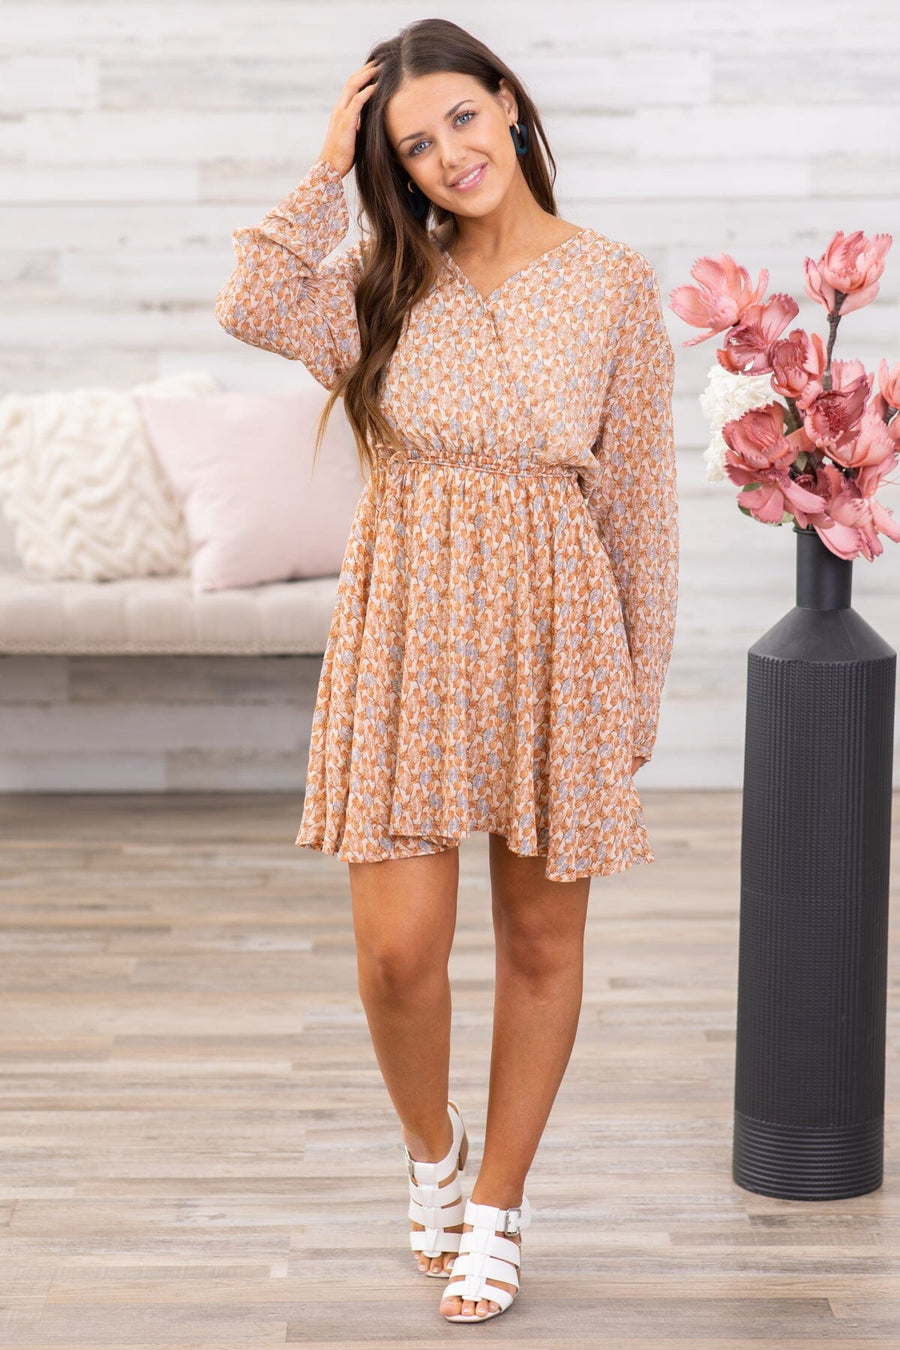 Tan Surplice Front Floral Long Sleeve Dress - Filly Flair